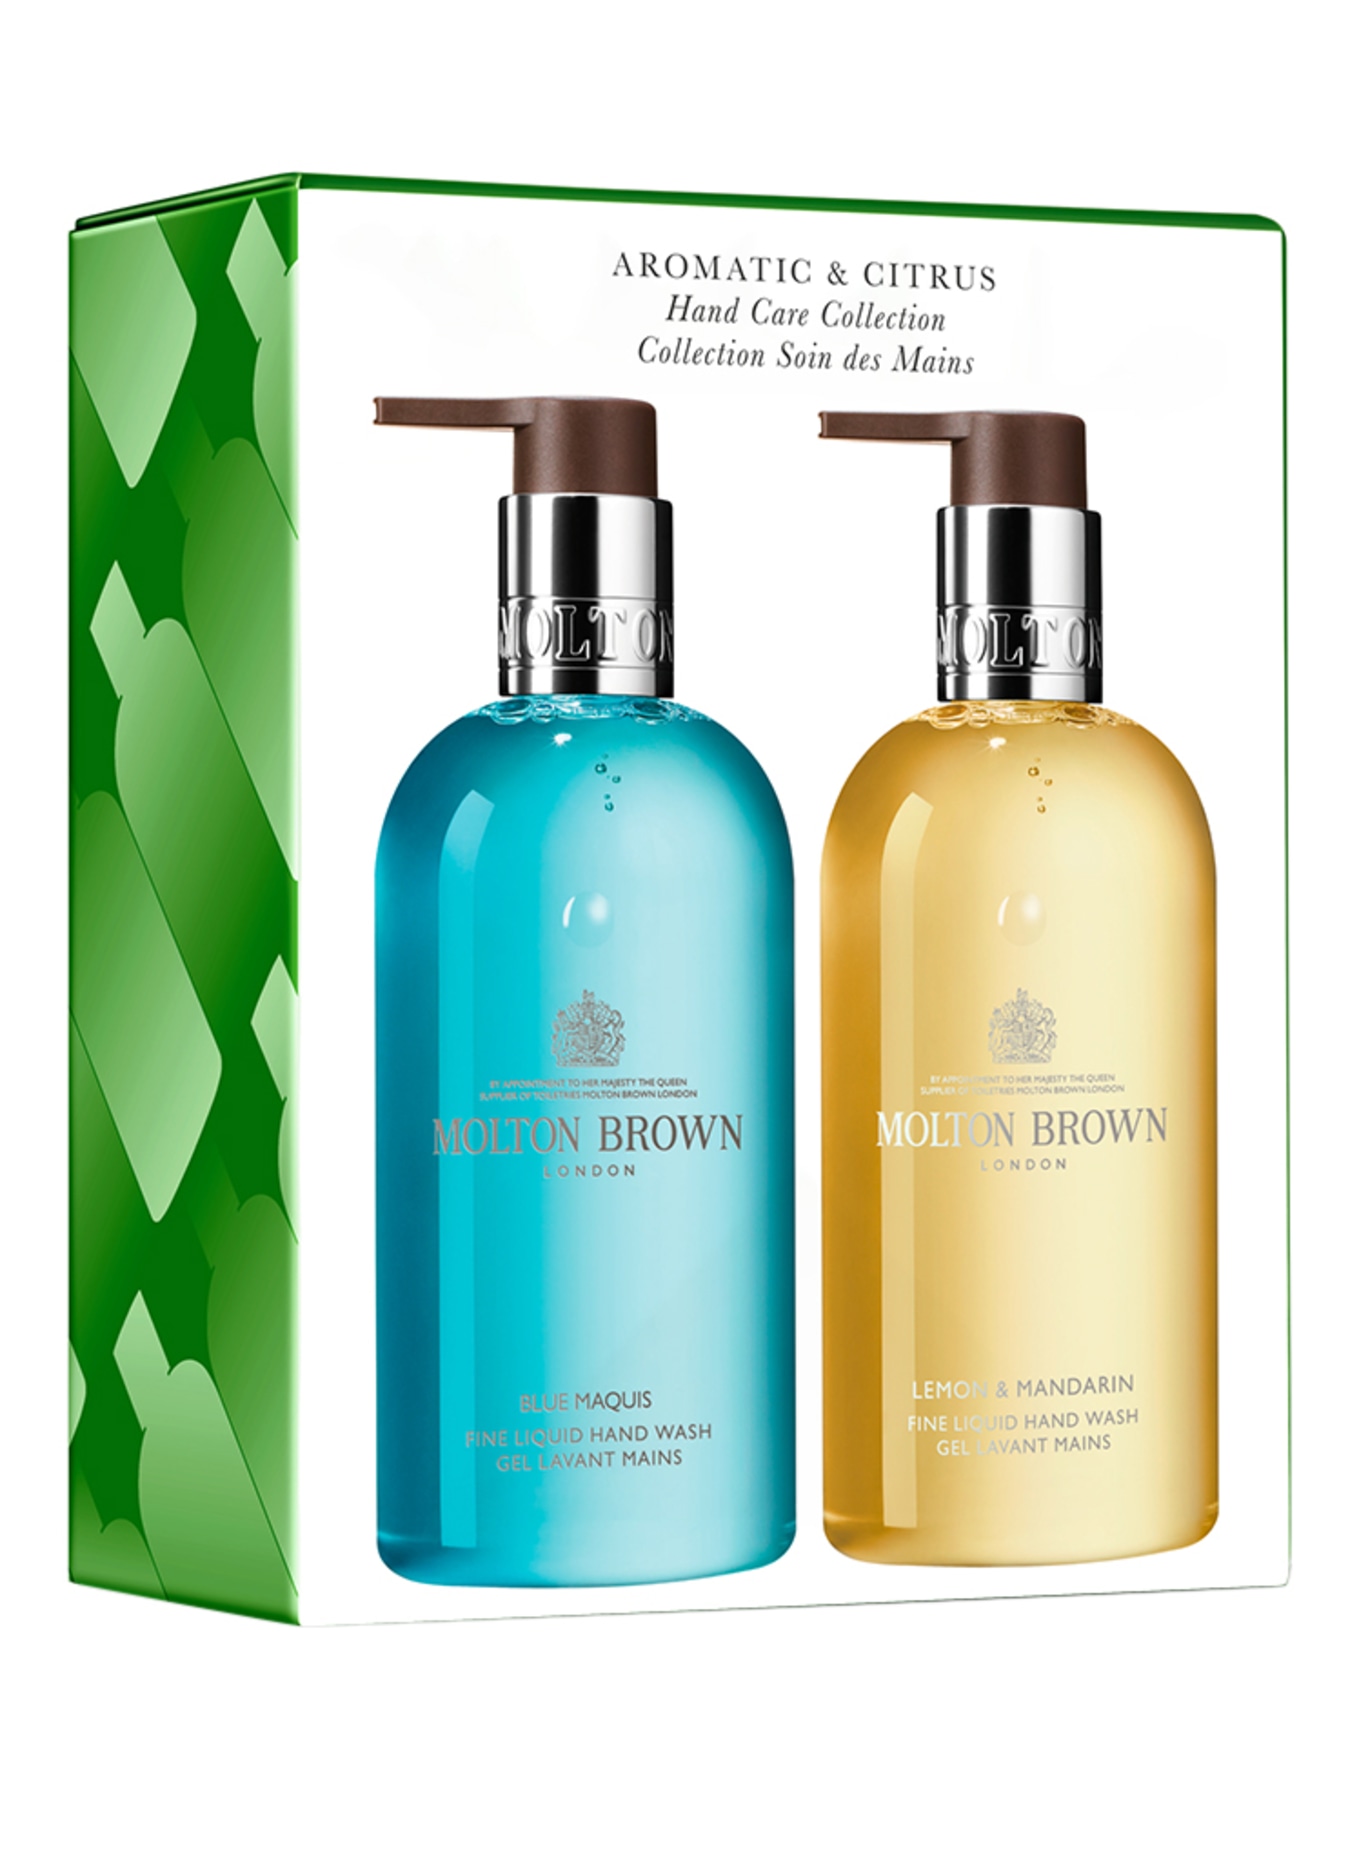 MOLTON BROWN AROMATIC & CITRUS HAND CARE COLLECTION (Obrázek 1)